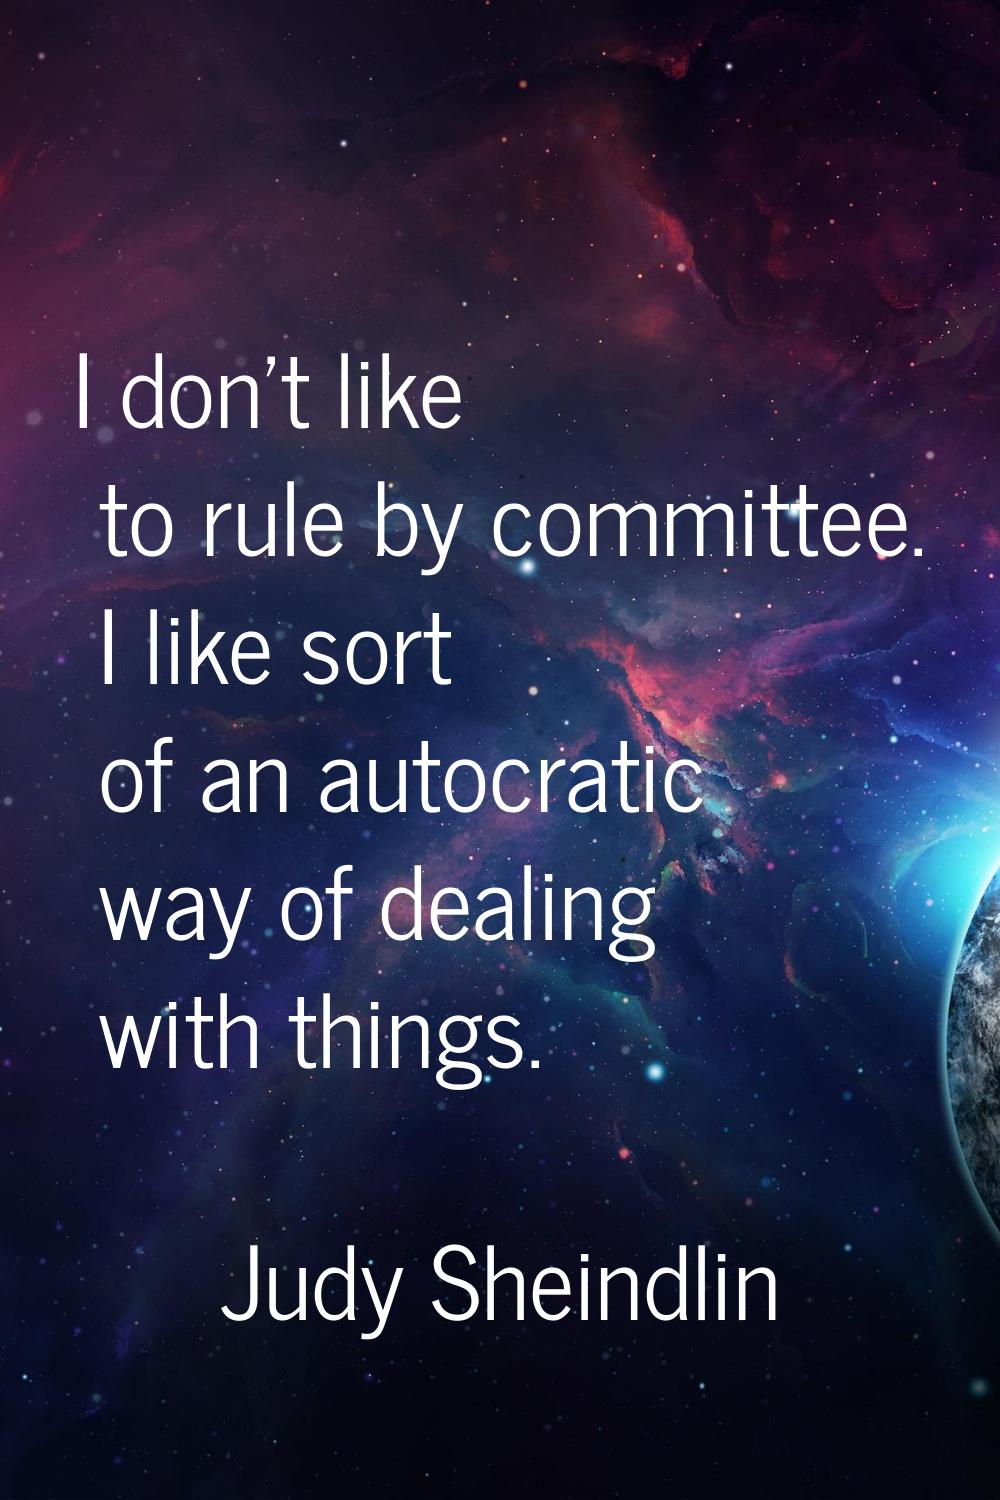 I don't like to rule by committee. I like sort of an autocratic way of dealing with things.